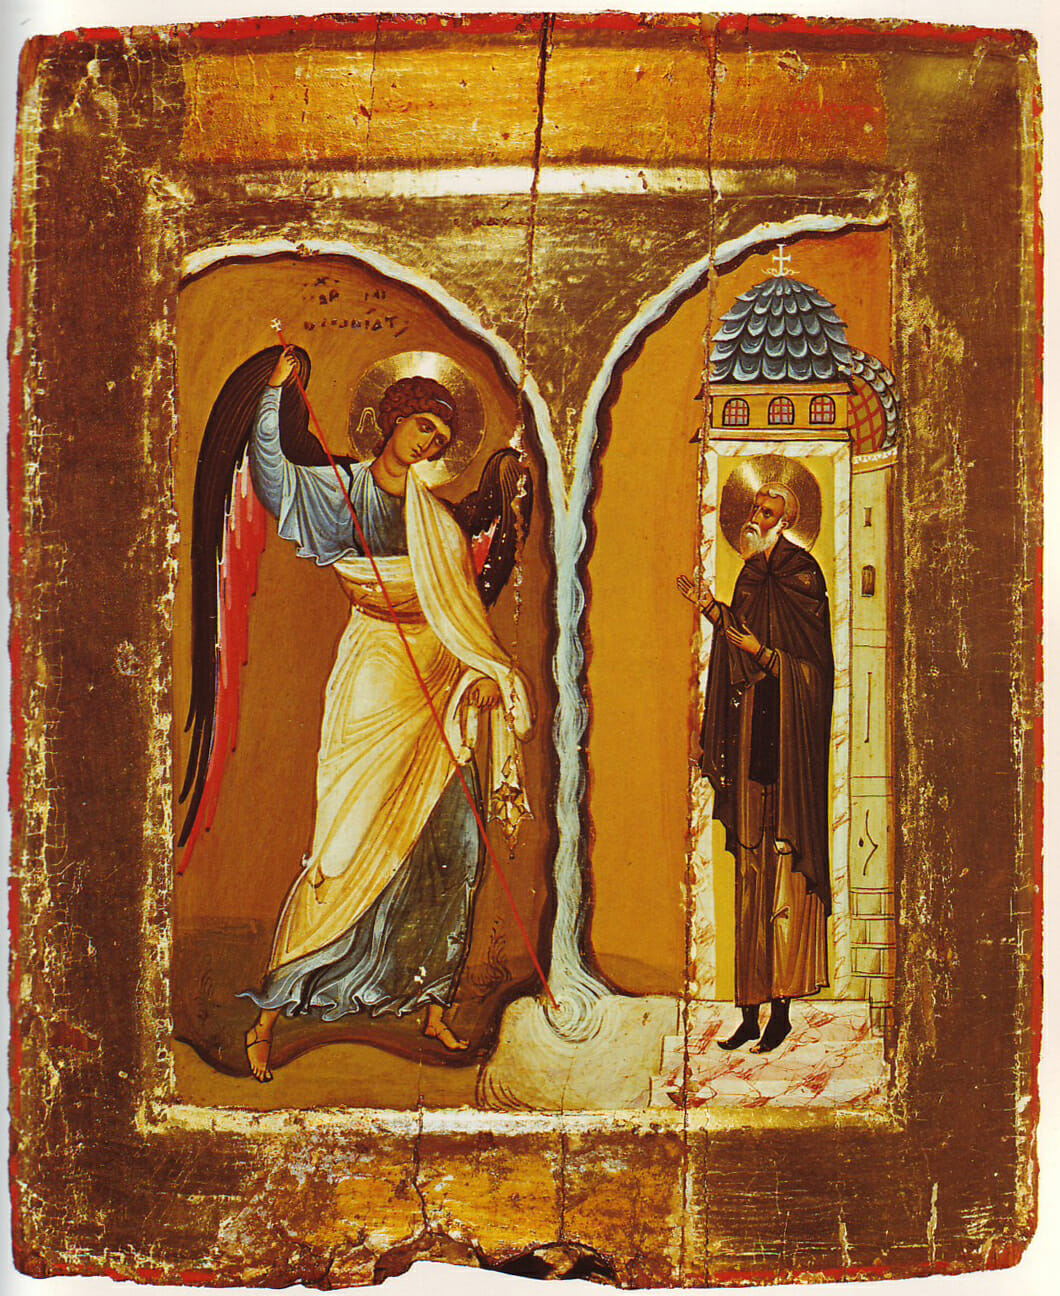 Archangel Michael and the monk Archippus at Chonae. St. Catherine's Monastery Sinai. First half of the 12th century. 37.5 x 30.7 cm. In this icon we can clearly see the employment of two formal tendencies. On the one hand, the angel is depicted in swift movement, classical gracefulness and corporeality. On the other hand, St. Archippus is depicted more abstractly, utterly flat and still, as firm as the stone church behind him. The bodiless angel takes on form as he executes his task, whereas the bodily man becomes as if incorporeal in the attainment of dispassion. 